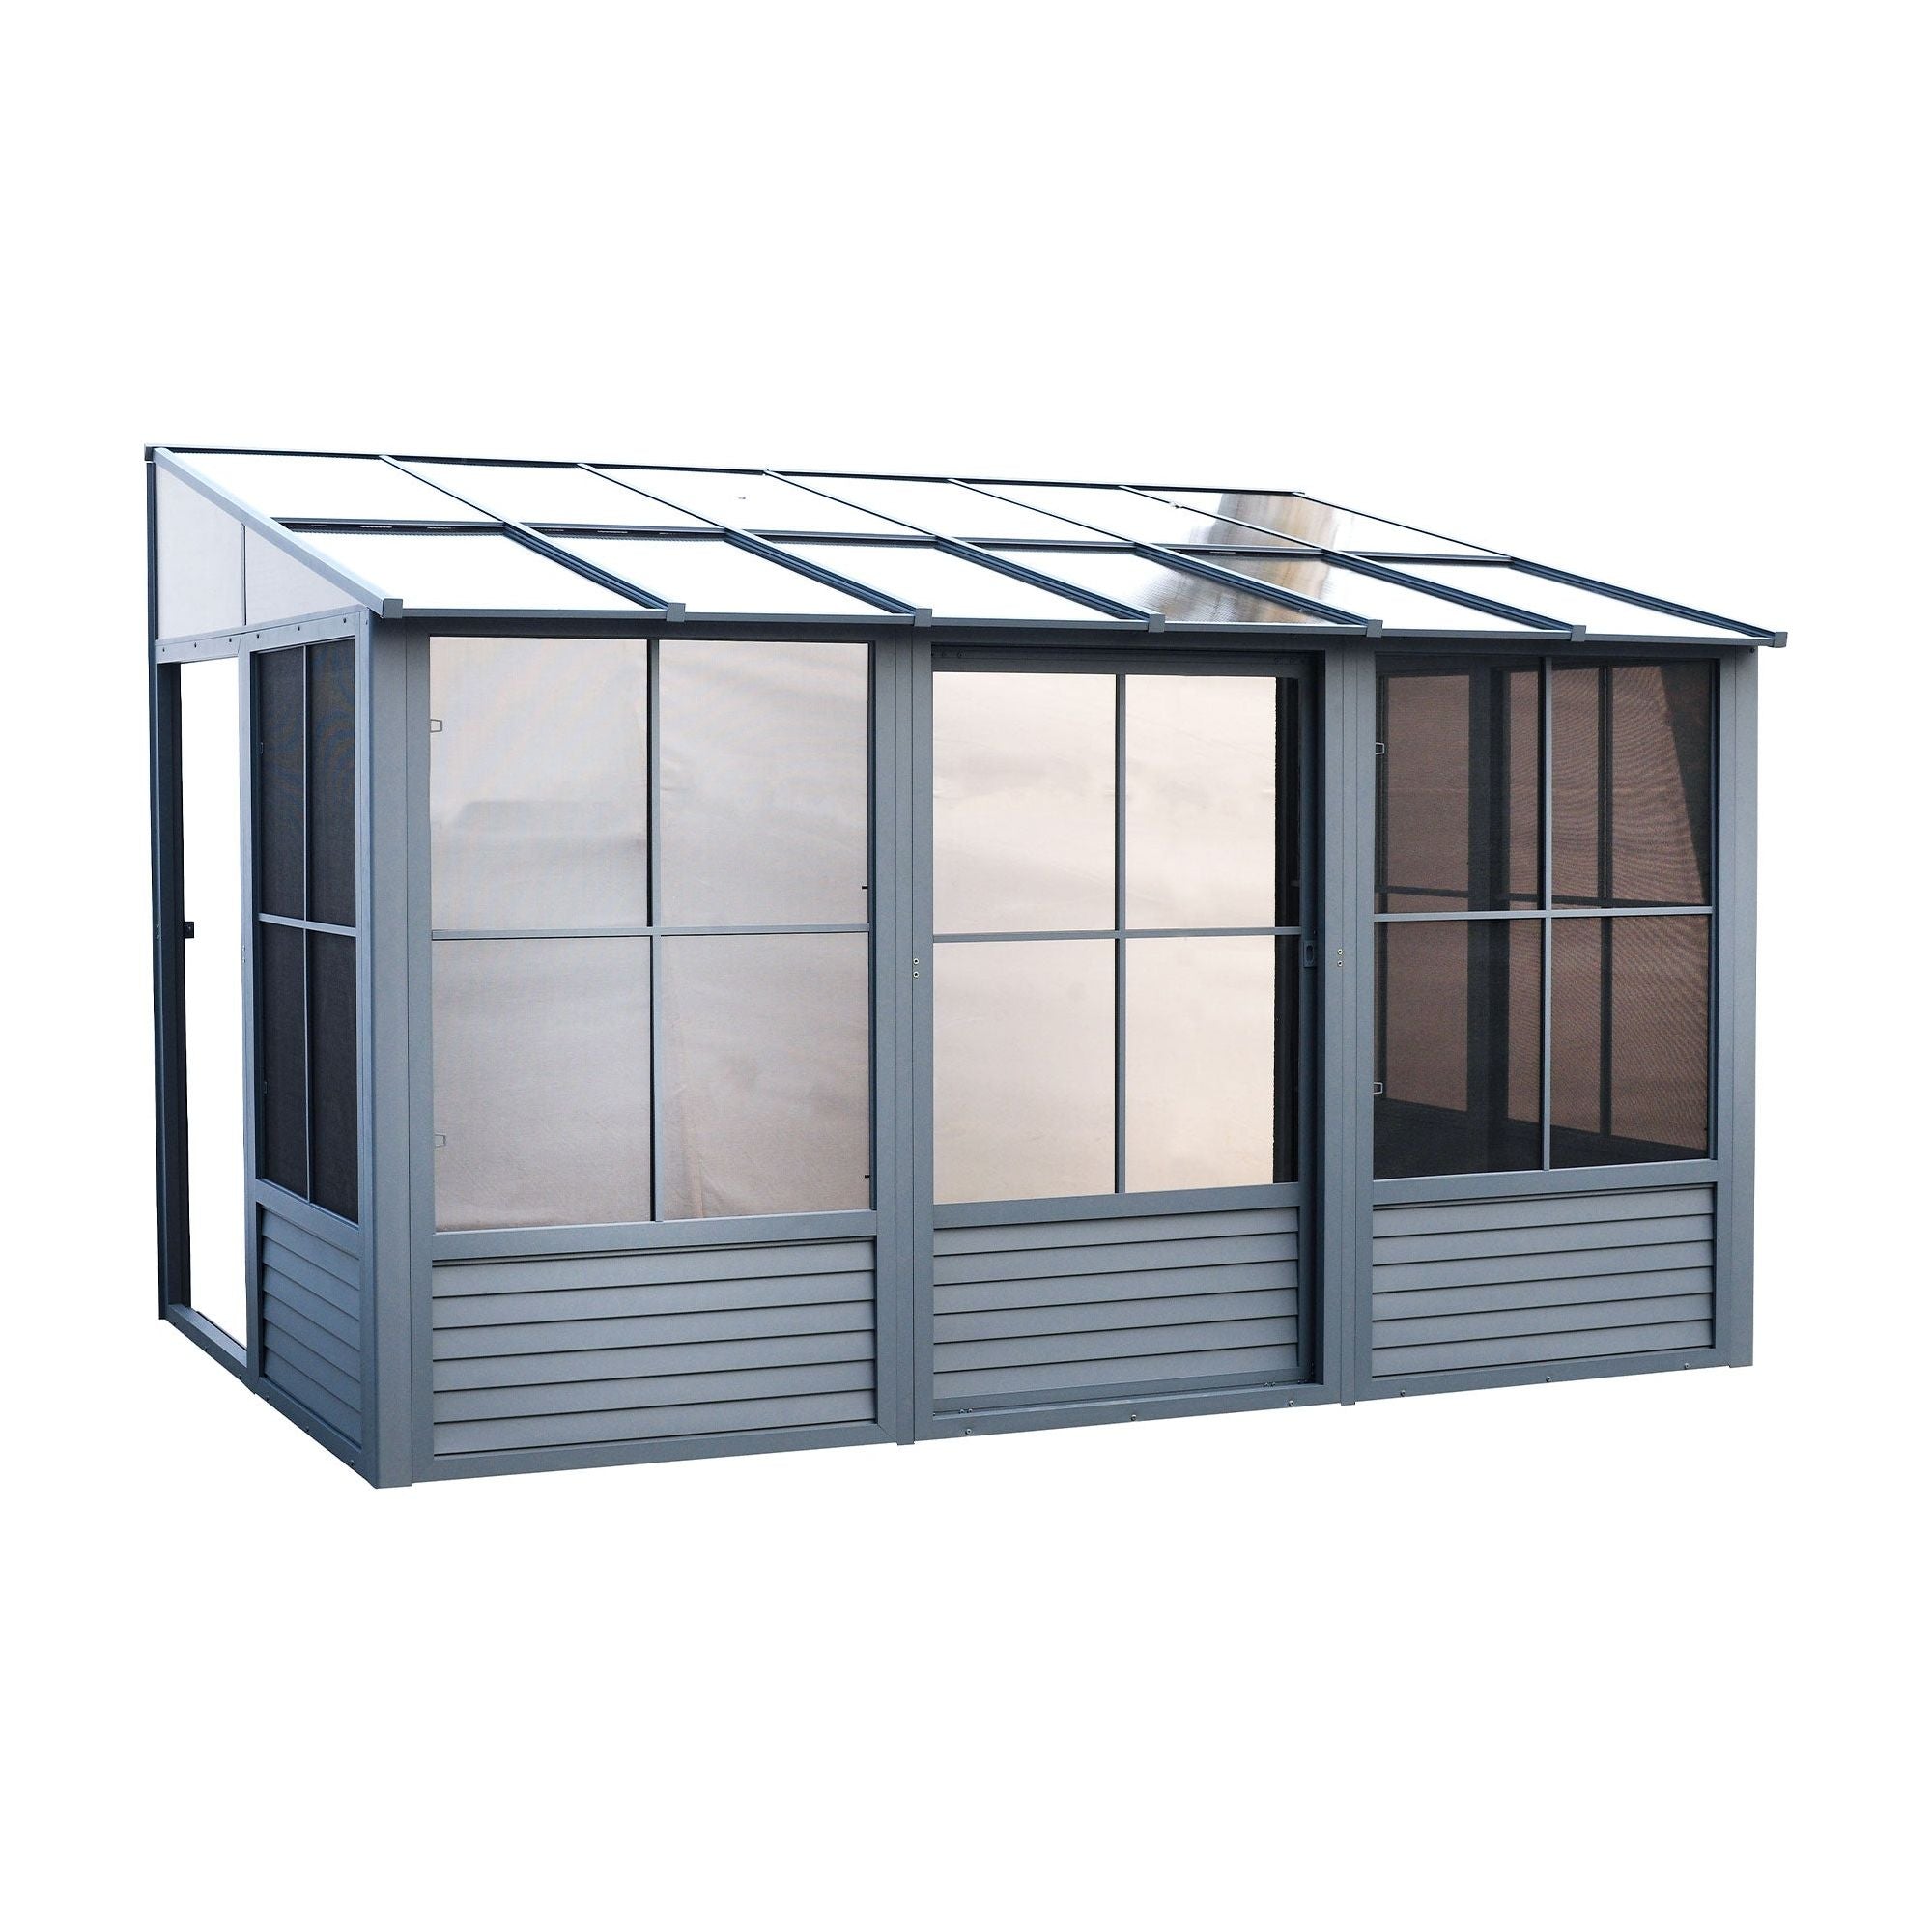 Gazebo Penguin Wall Mounted Florence Solarium with Polycarbonate Roof Add a Room 10'x16' - W1610 - Serenity Provision